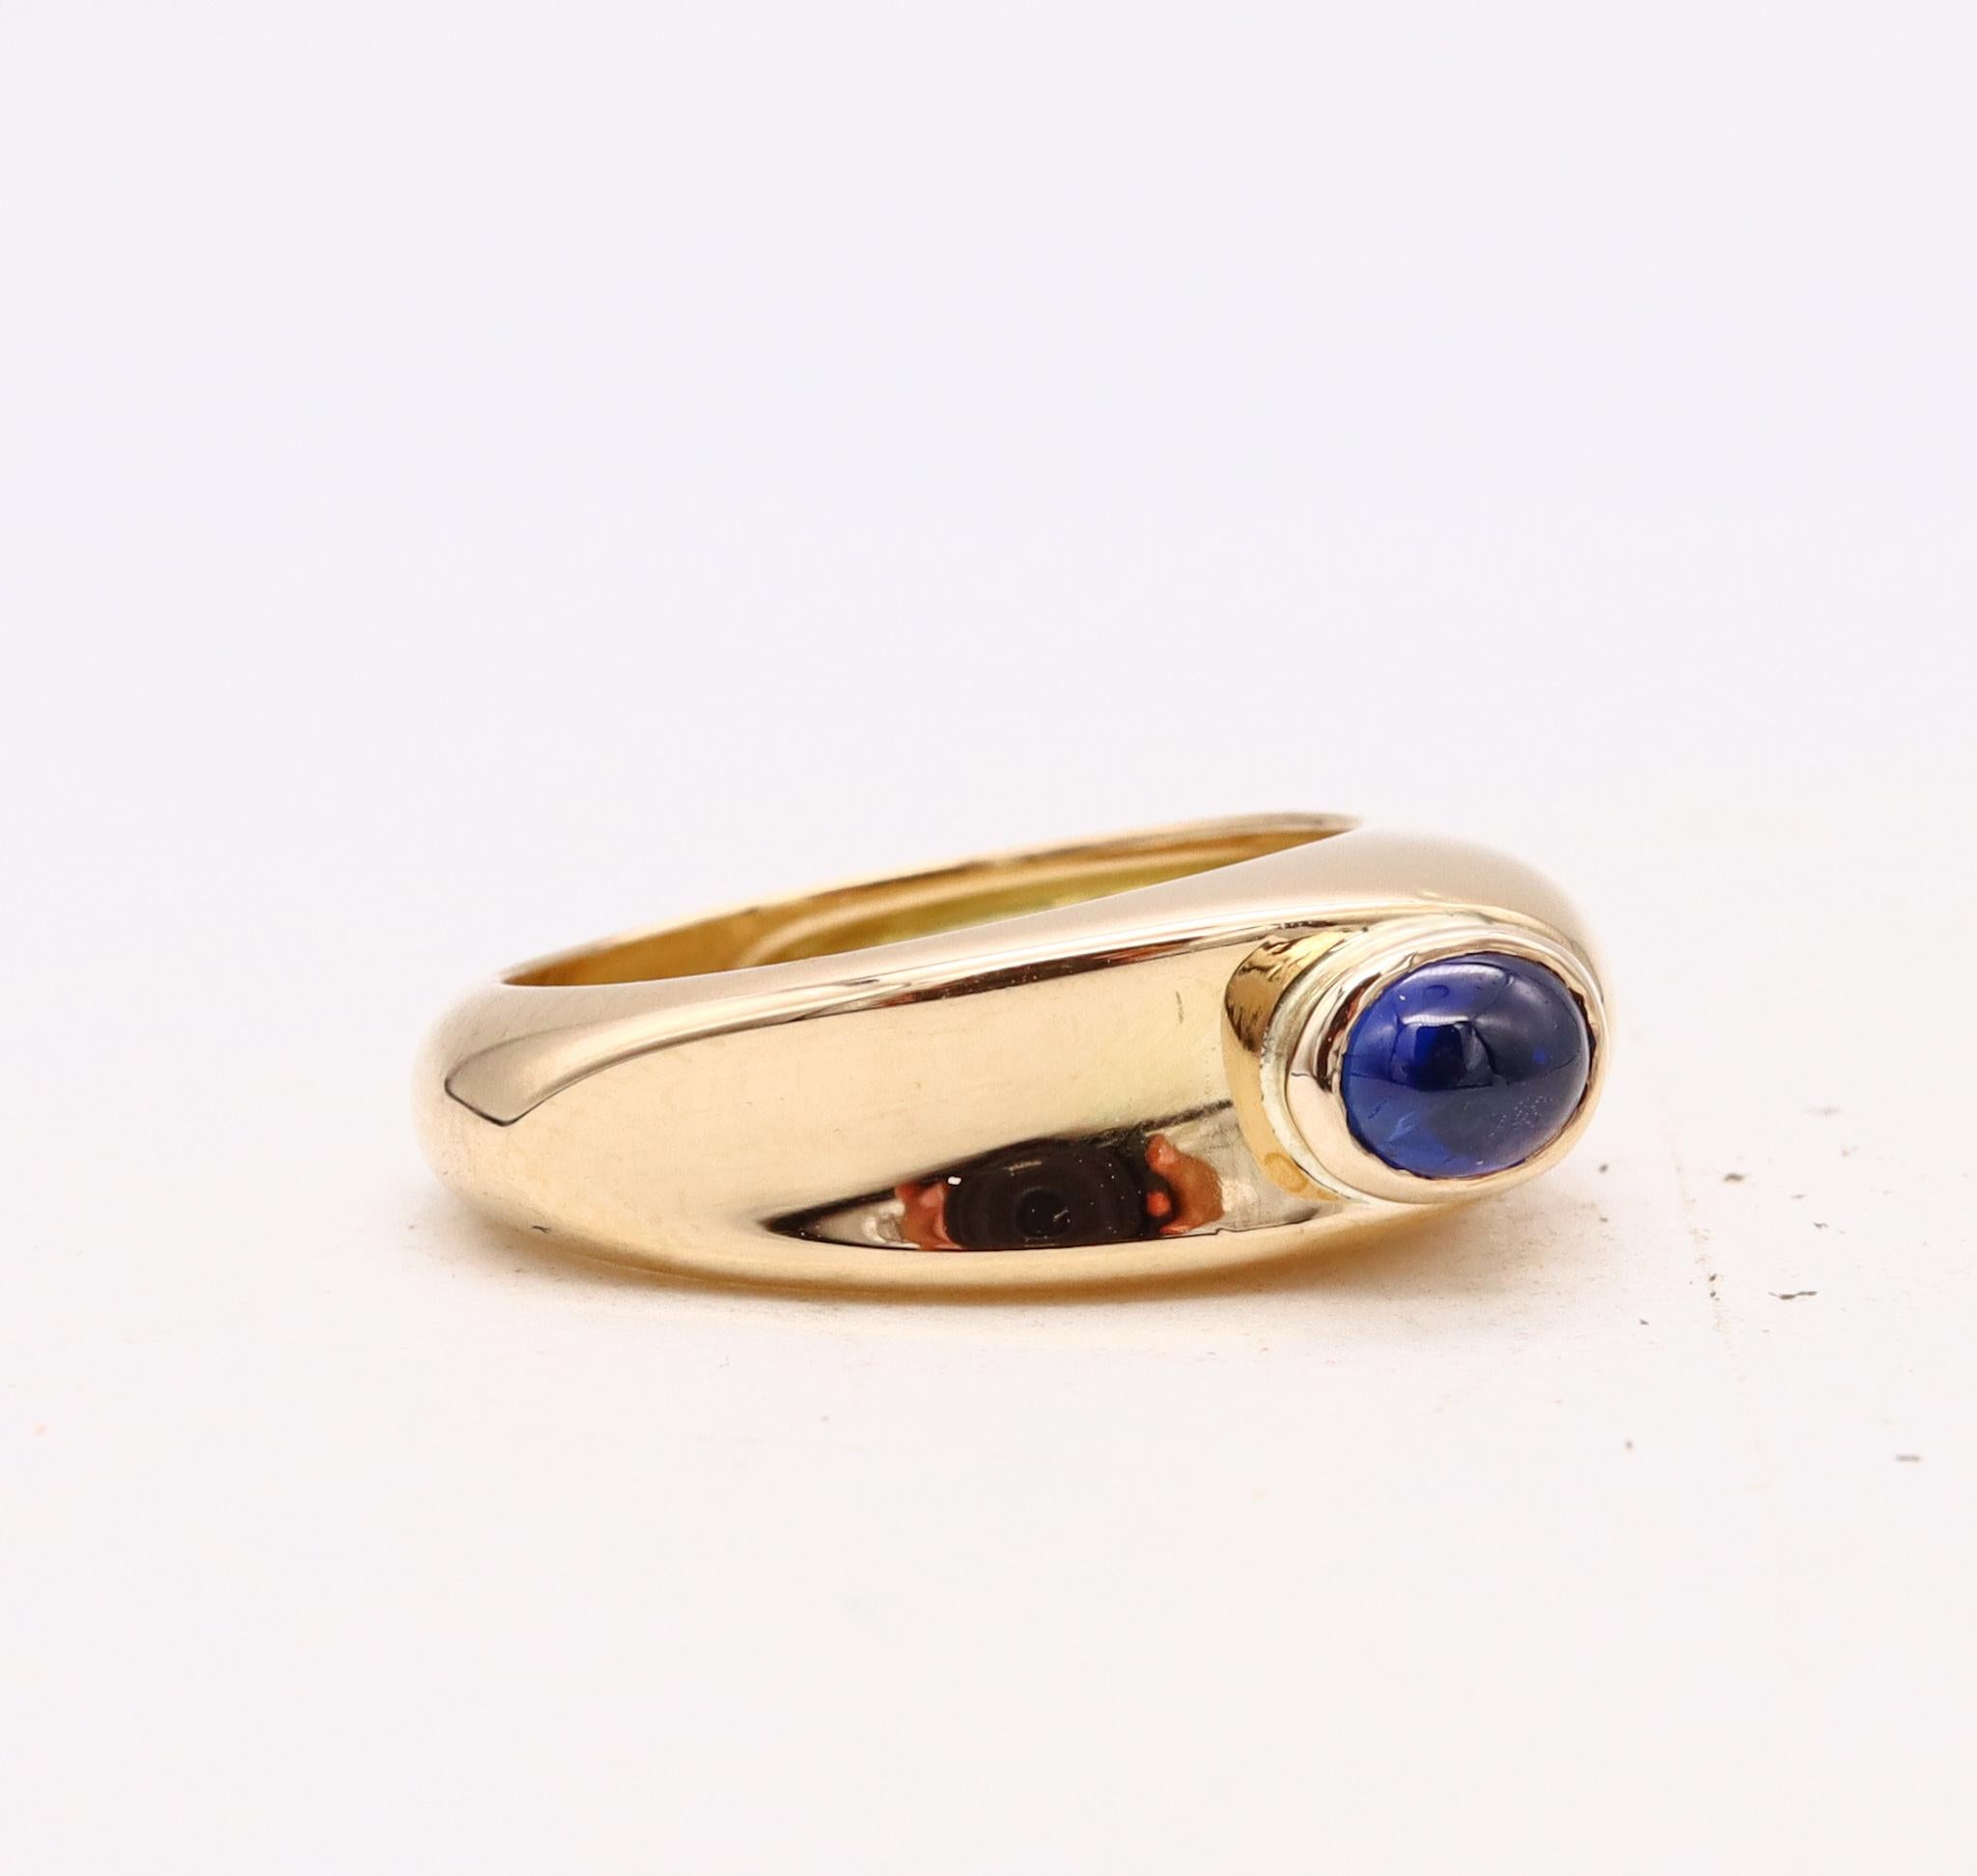 Fred of Paris Modernist Gem Set Ring 18Kt Yellow Gold 0.96 Cts Ceylon Sapphire For Sale 3